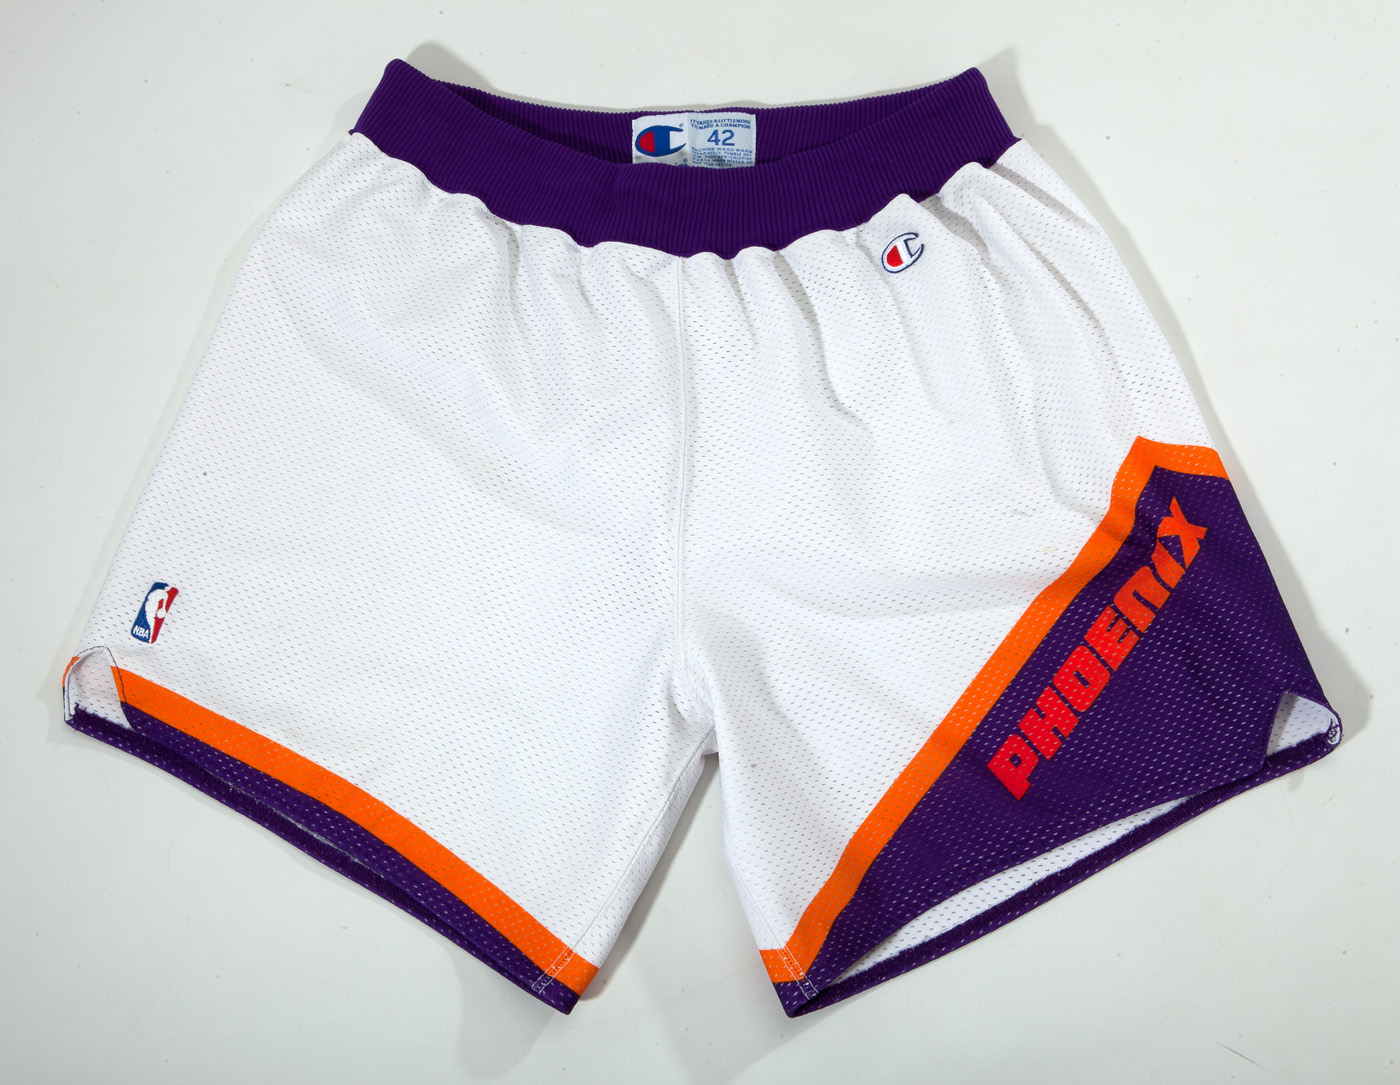 THEY'RE BACK: PHOENIX SUNS REVEAL CLASSIC UNIFORM INSPIRED BY 1992-1993  WESTERN CONFERENCE CHAMPION TEAM